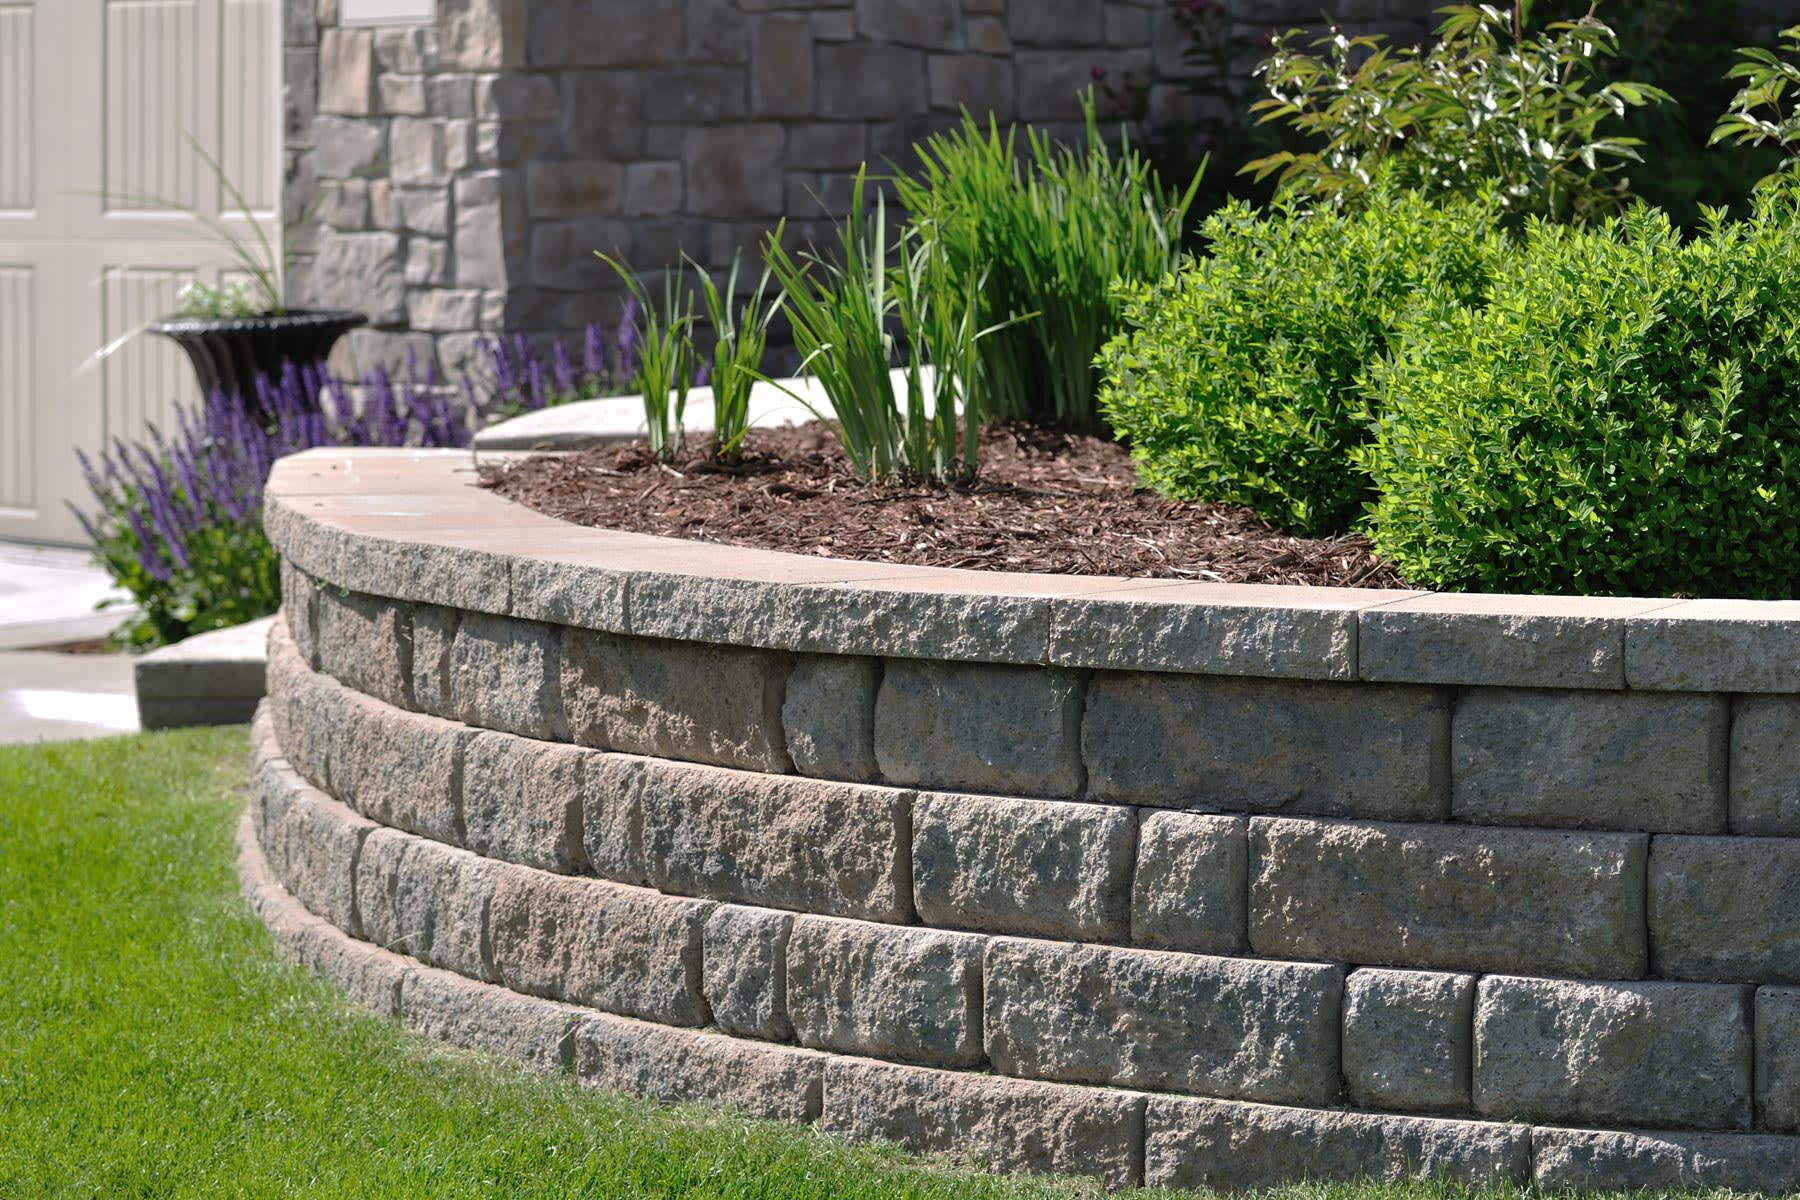 How much does a retaining wall cost?